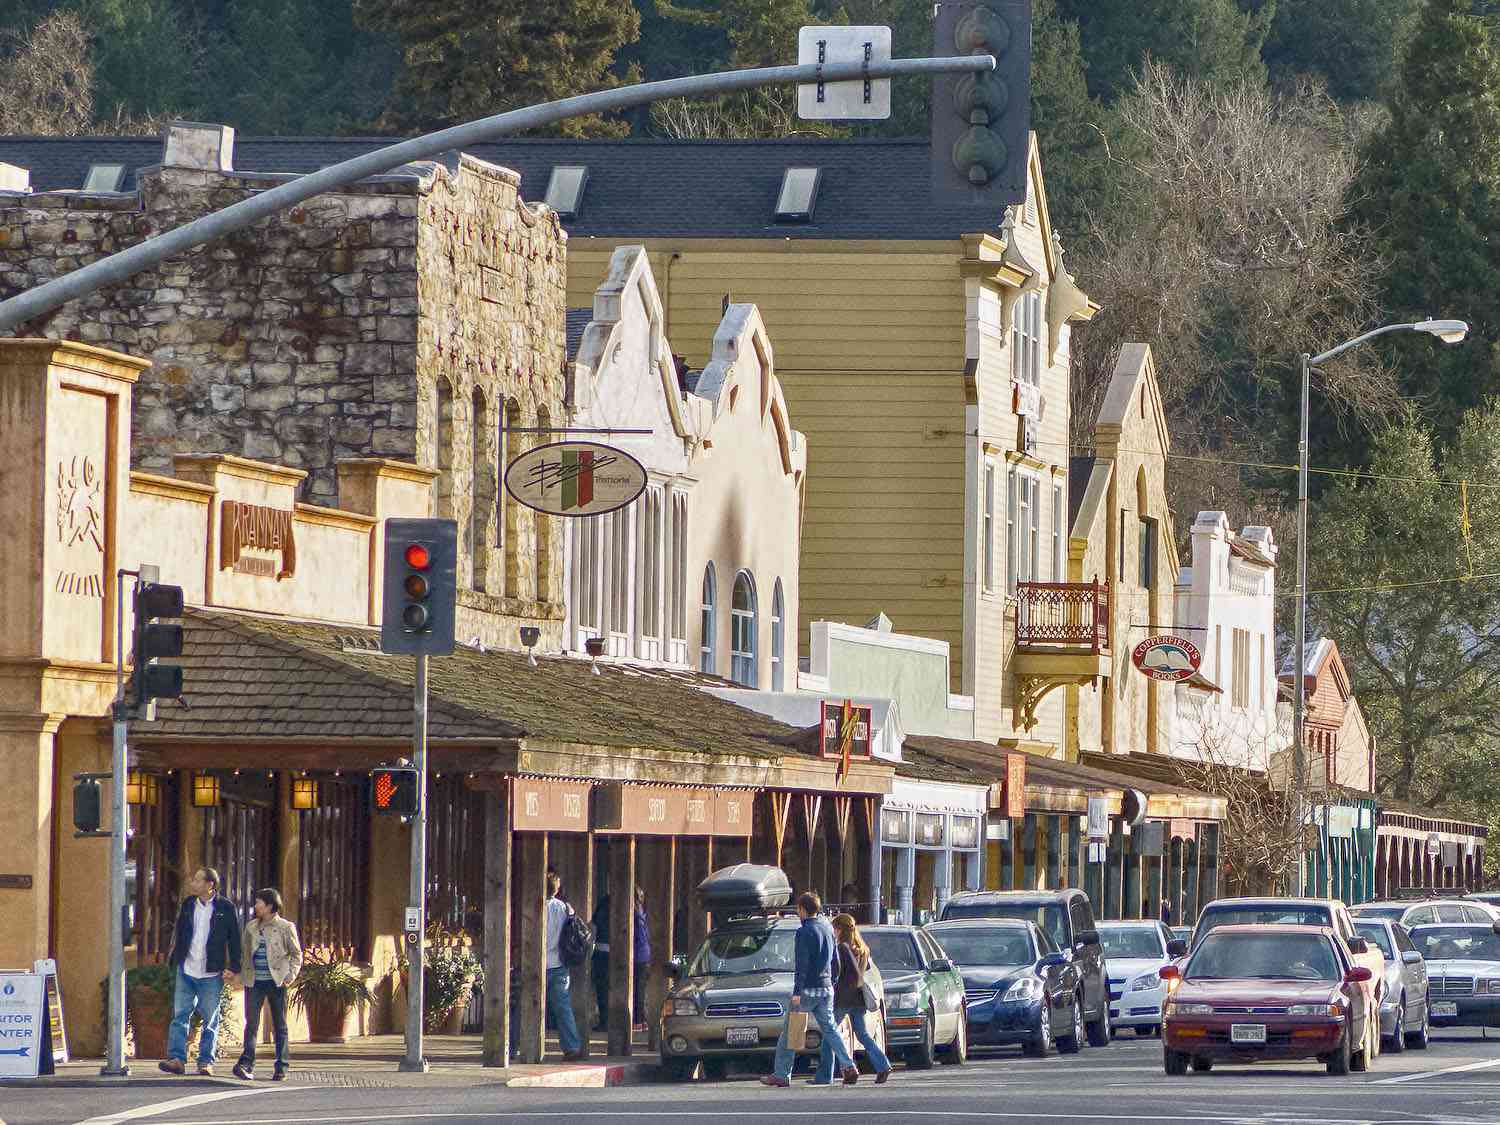 Indulge in luxury shopping in Calistoga, Napa Valley, amidst charming storefronts.